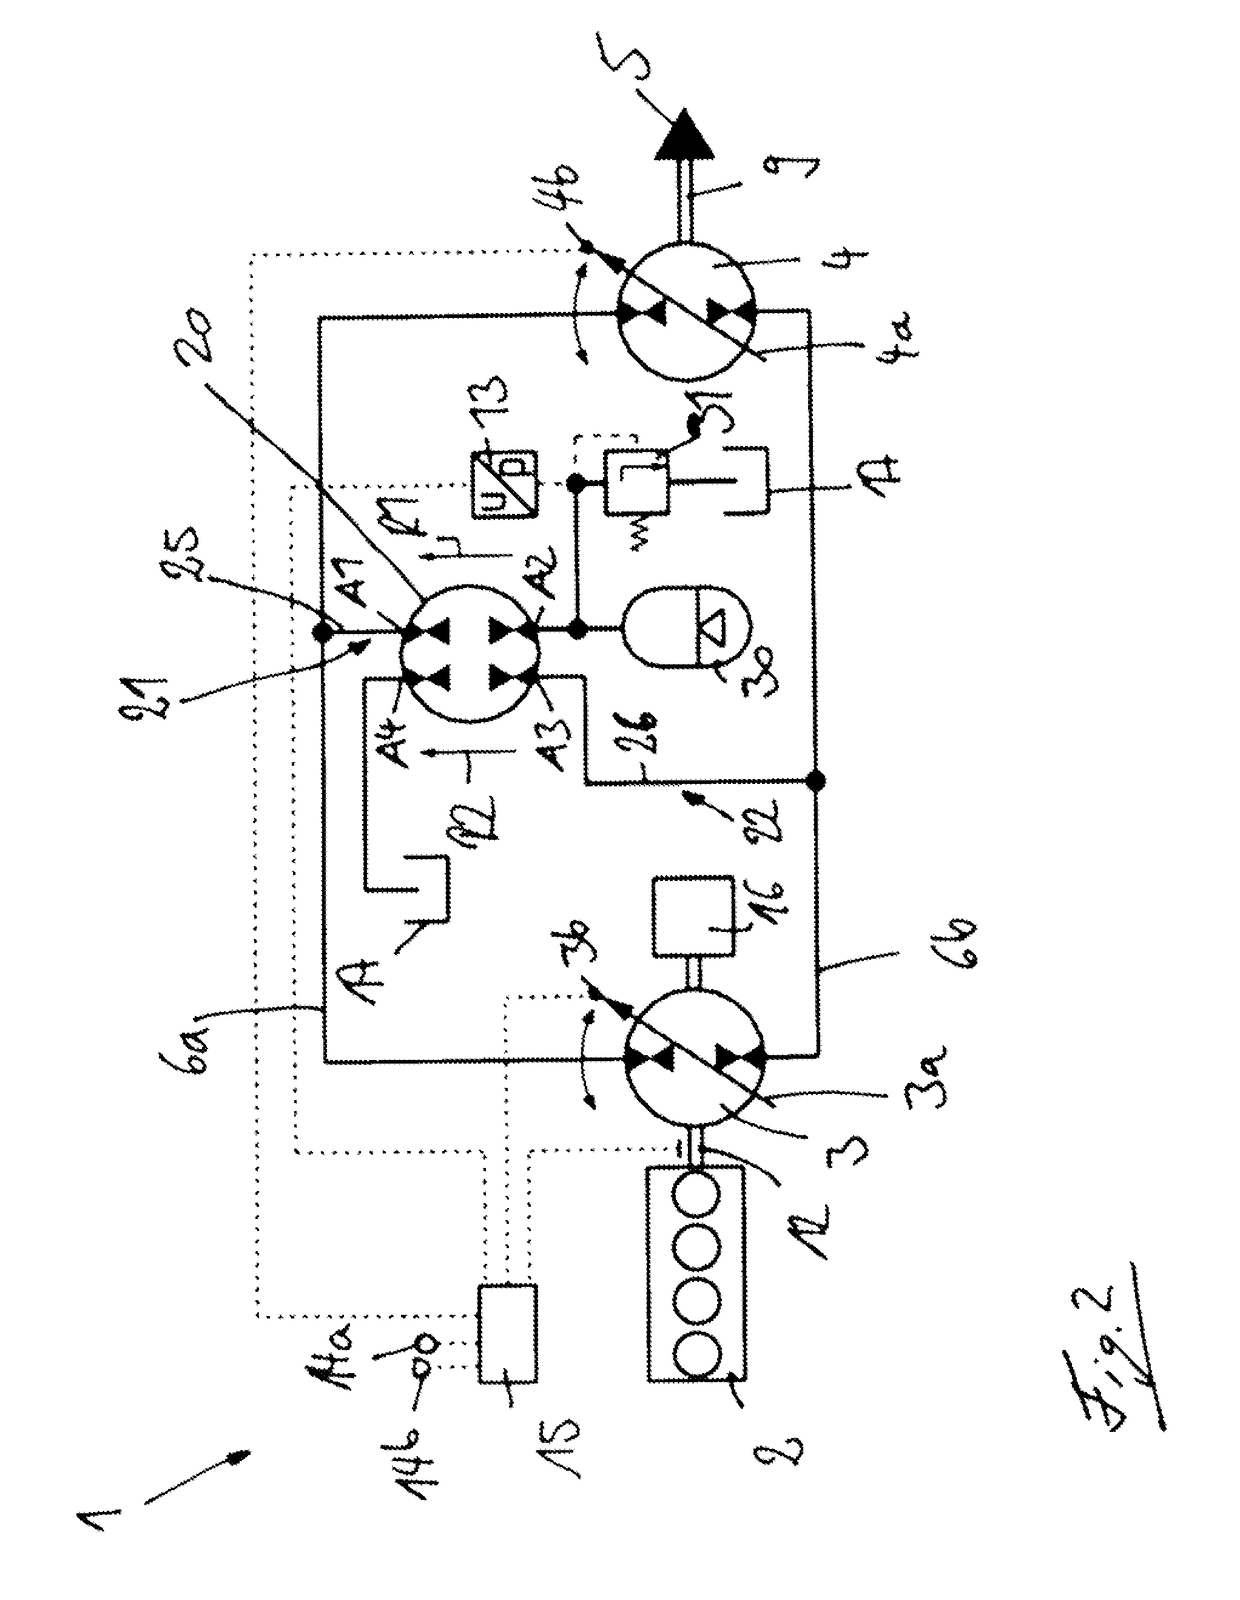 Hydrostatic drive system in a closed circuit